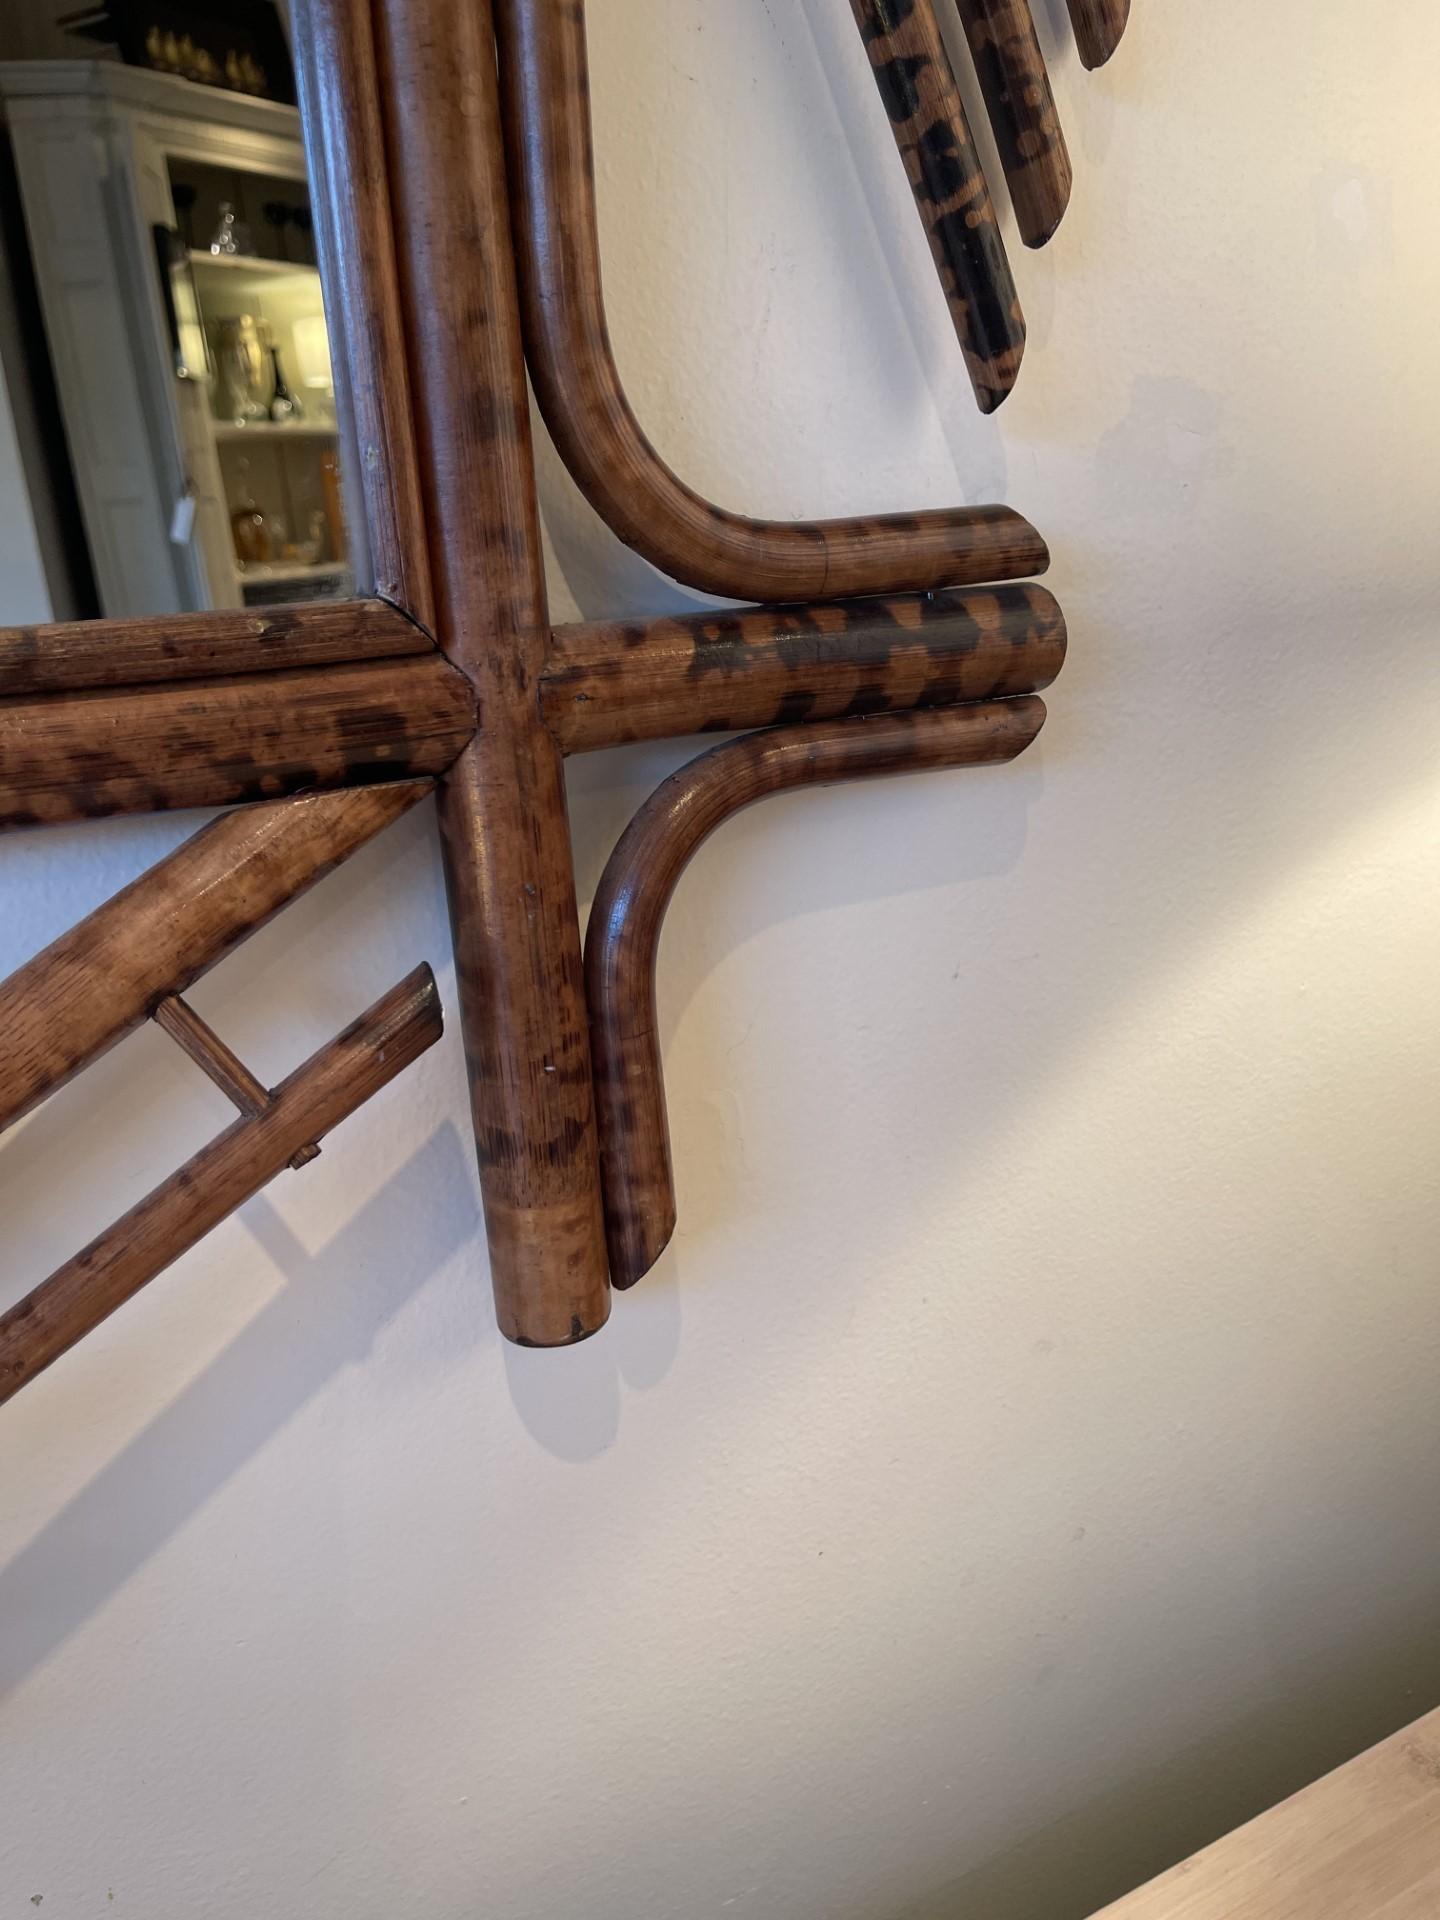 A Rare find in this  exceptional Chinese Chippendale Faux Tortoiseshell  mirror. Easily placed in  most environment's, from modern to traditional , bamboo is timeless and transitional, beautifully textured.
Brought into MA from the UK, this mirror